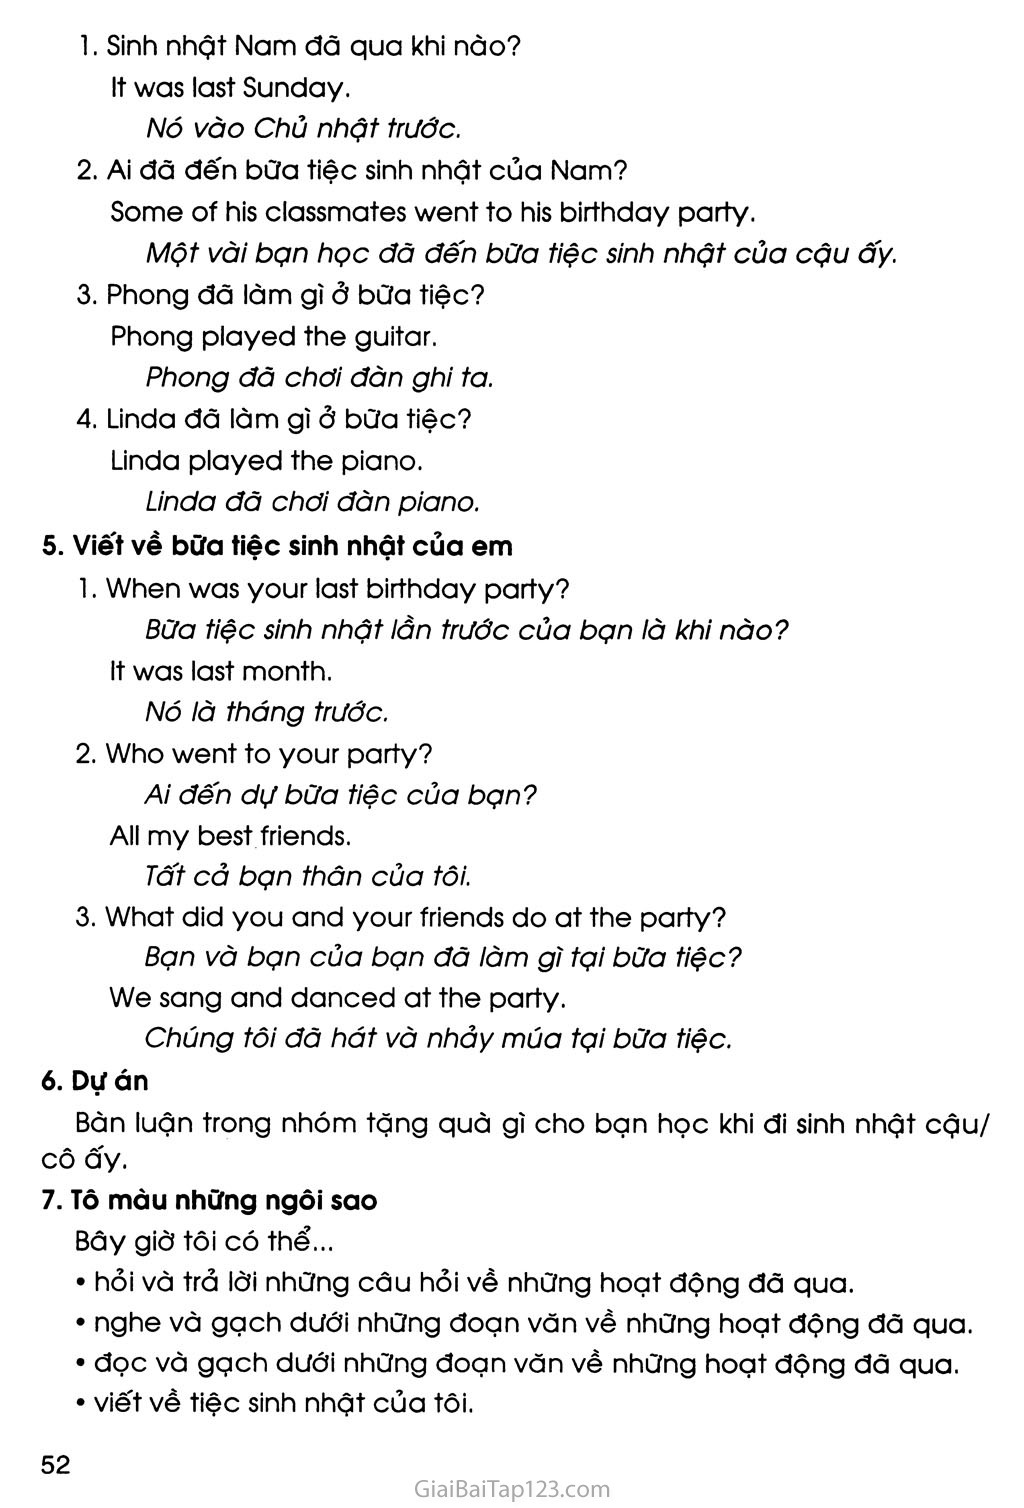 UNIT 4: DID YOU GO TO THE PARTY? trang 13